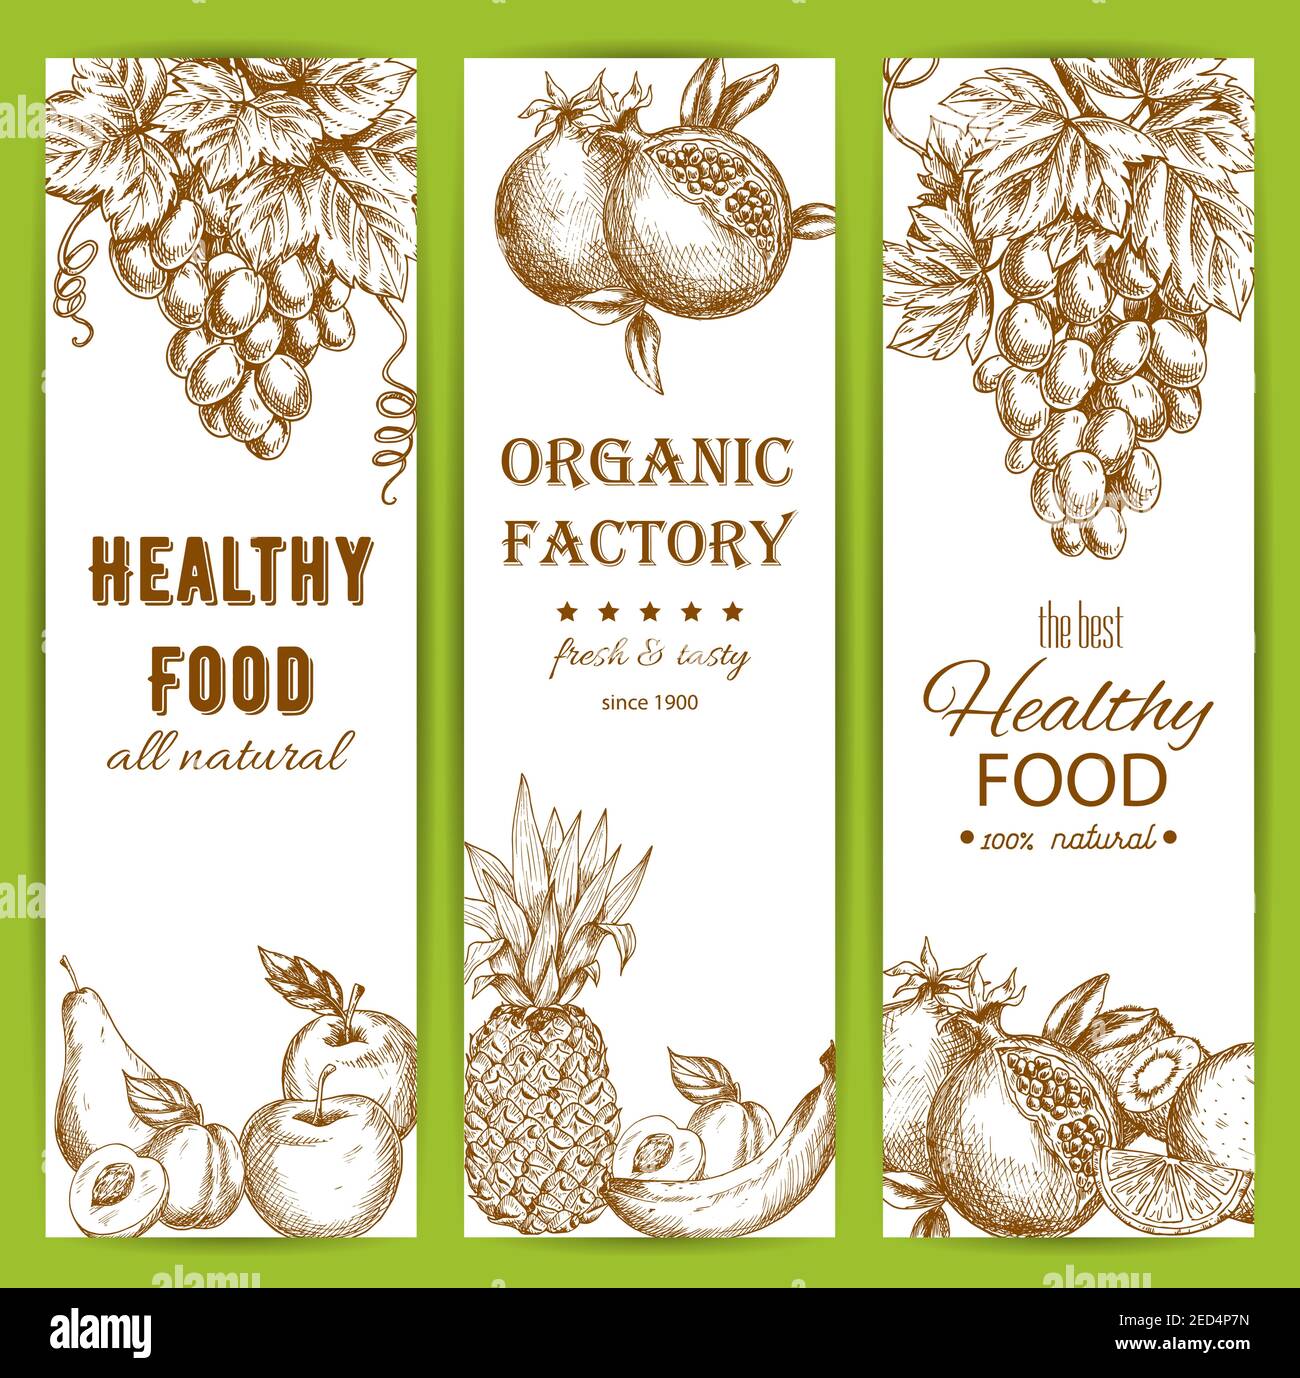 Healthy fruit food banners set. Vector sketch of natural organic fruits grape bunch, pomegranate, apple, apricot, pear, pineapple, banana, orange, cit Stock Vector